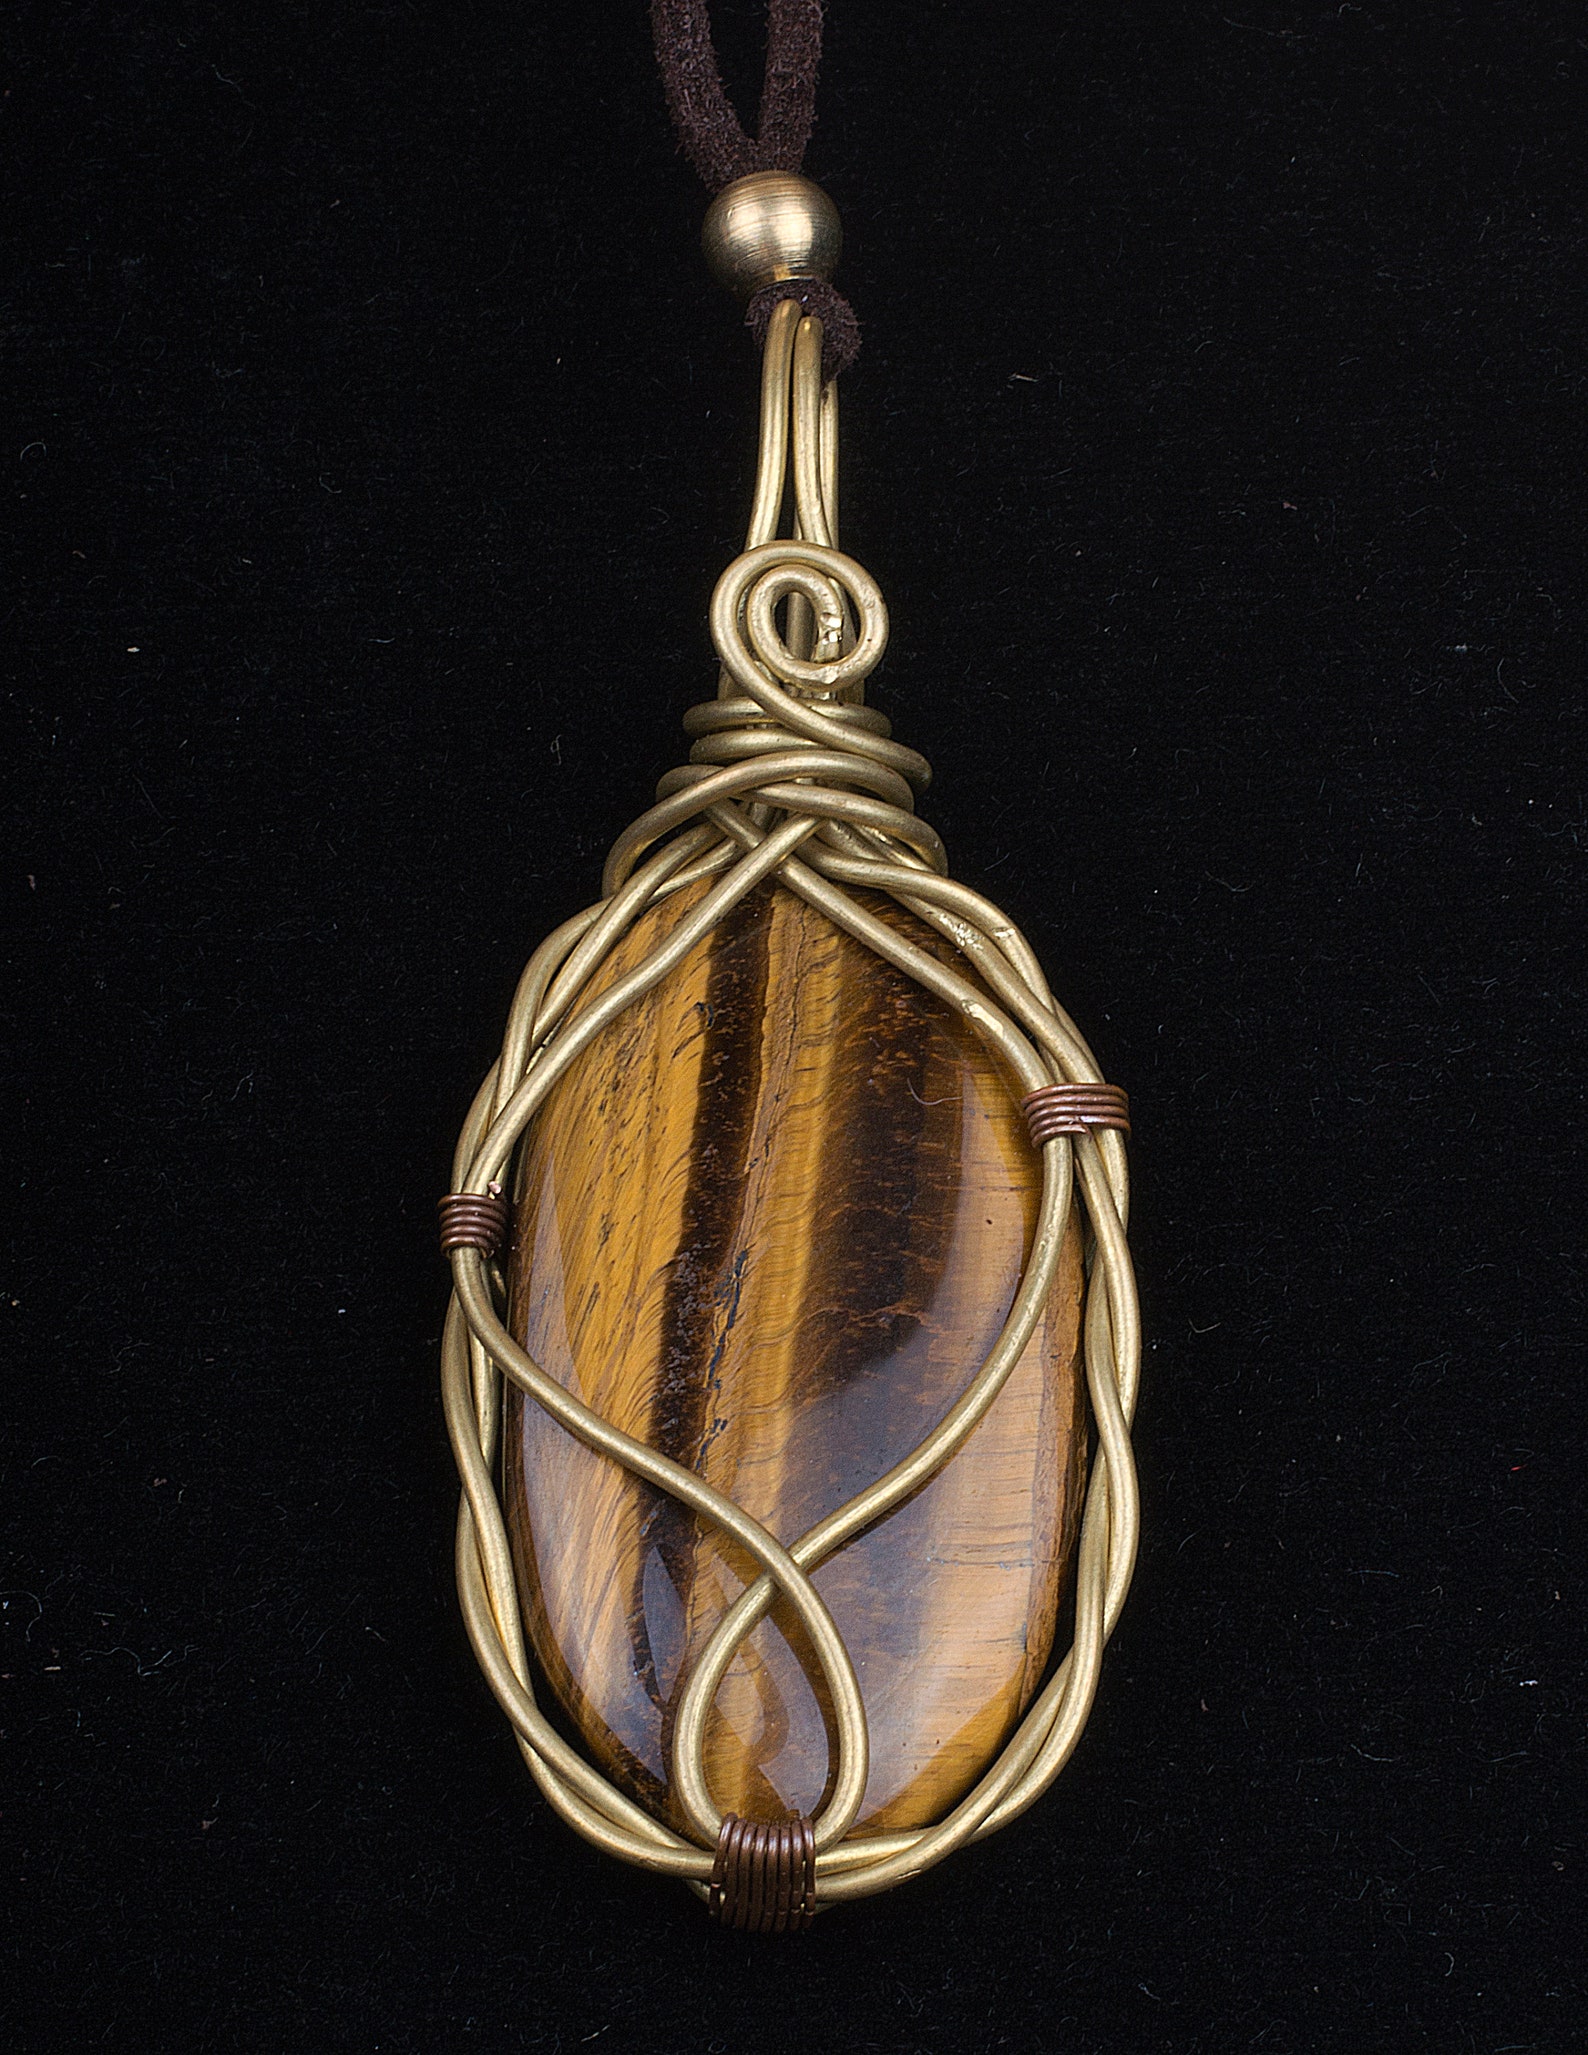 Tiger Eye Stone Necklace Handmade Wire Wrapped Jewelry Tiger Etsy